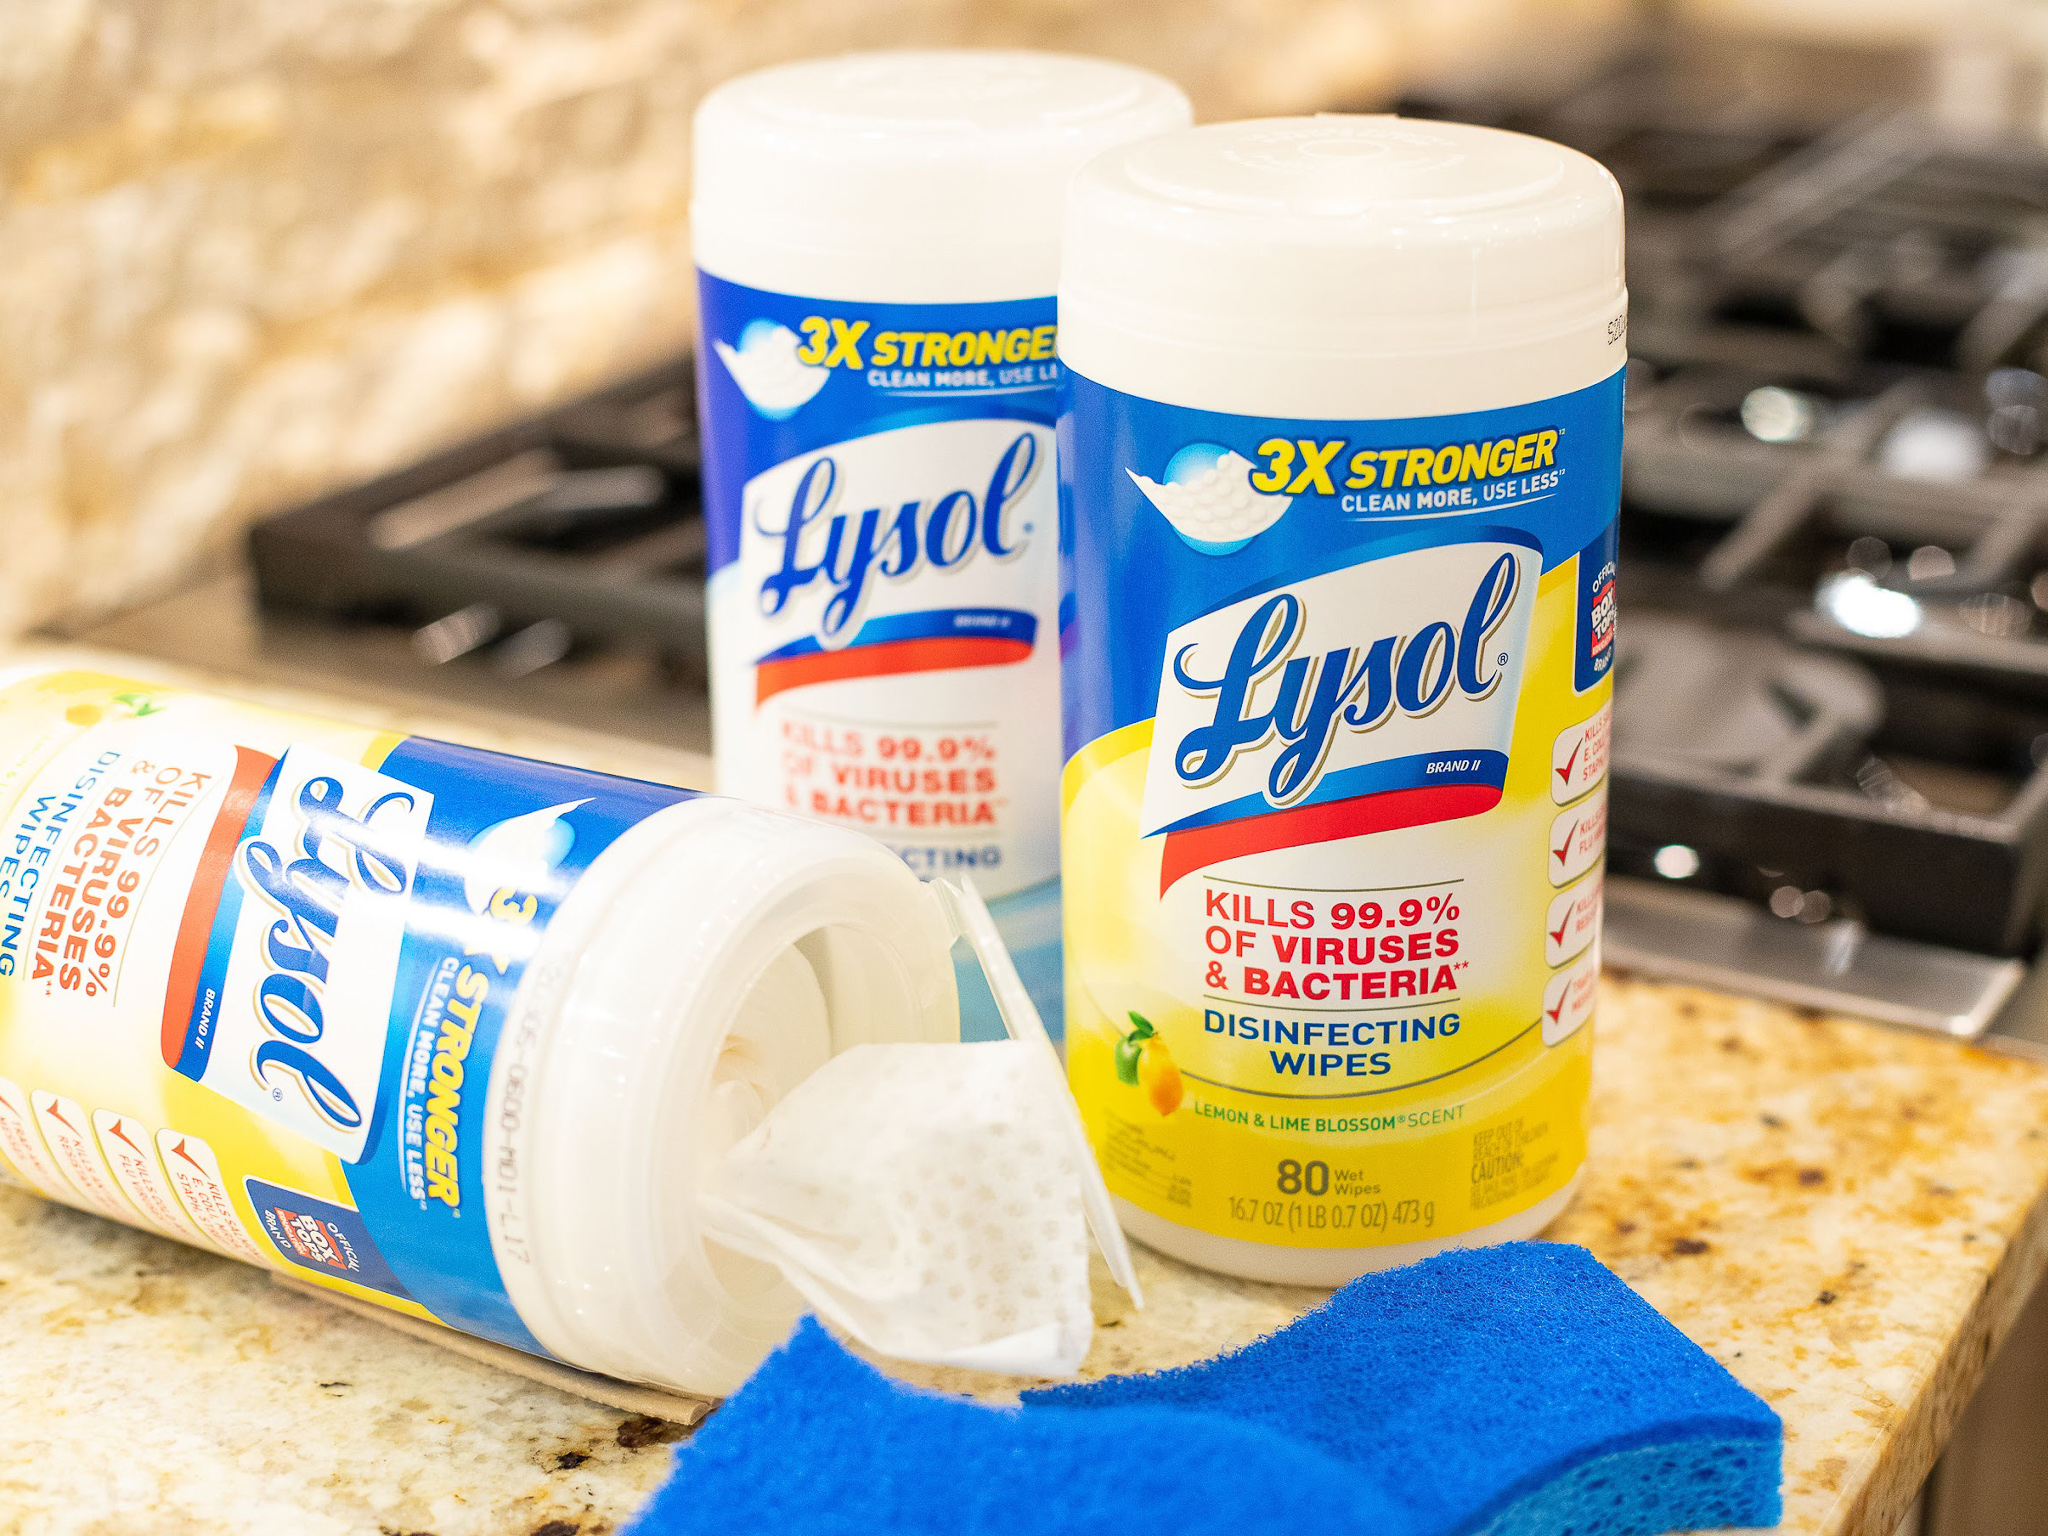 Get Lysol Disinfecting Wipes For As Low As $3.10 At Publix (Regular Price $7.19)